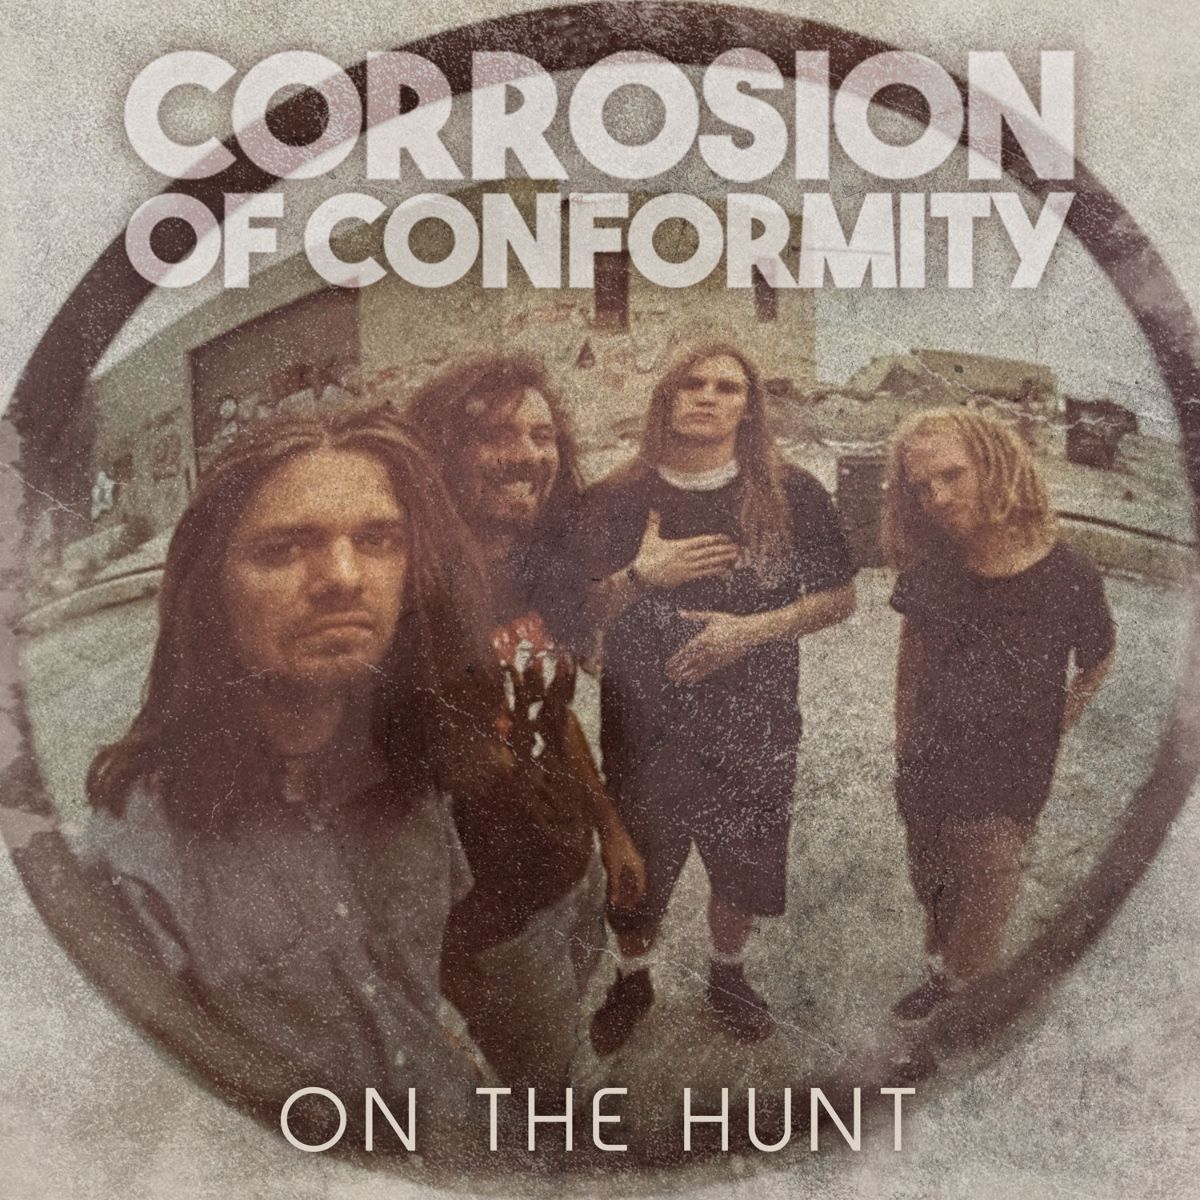 CORROSION OF CONFORMITY - Release Cover Of 'On The Hunt' by Lynyrd Skynyrd + European Tour Dates Kick Off May 1st